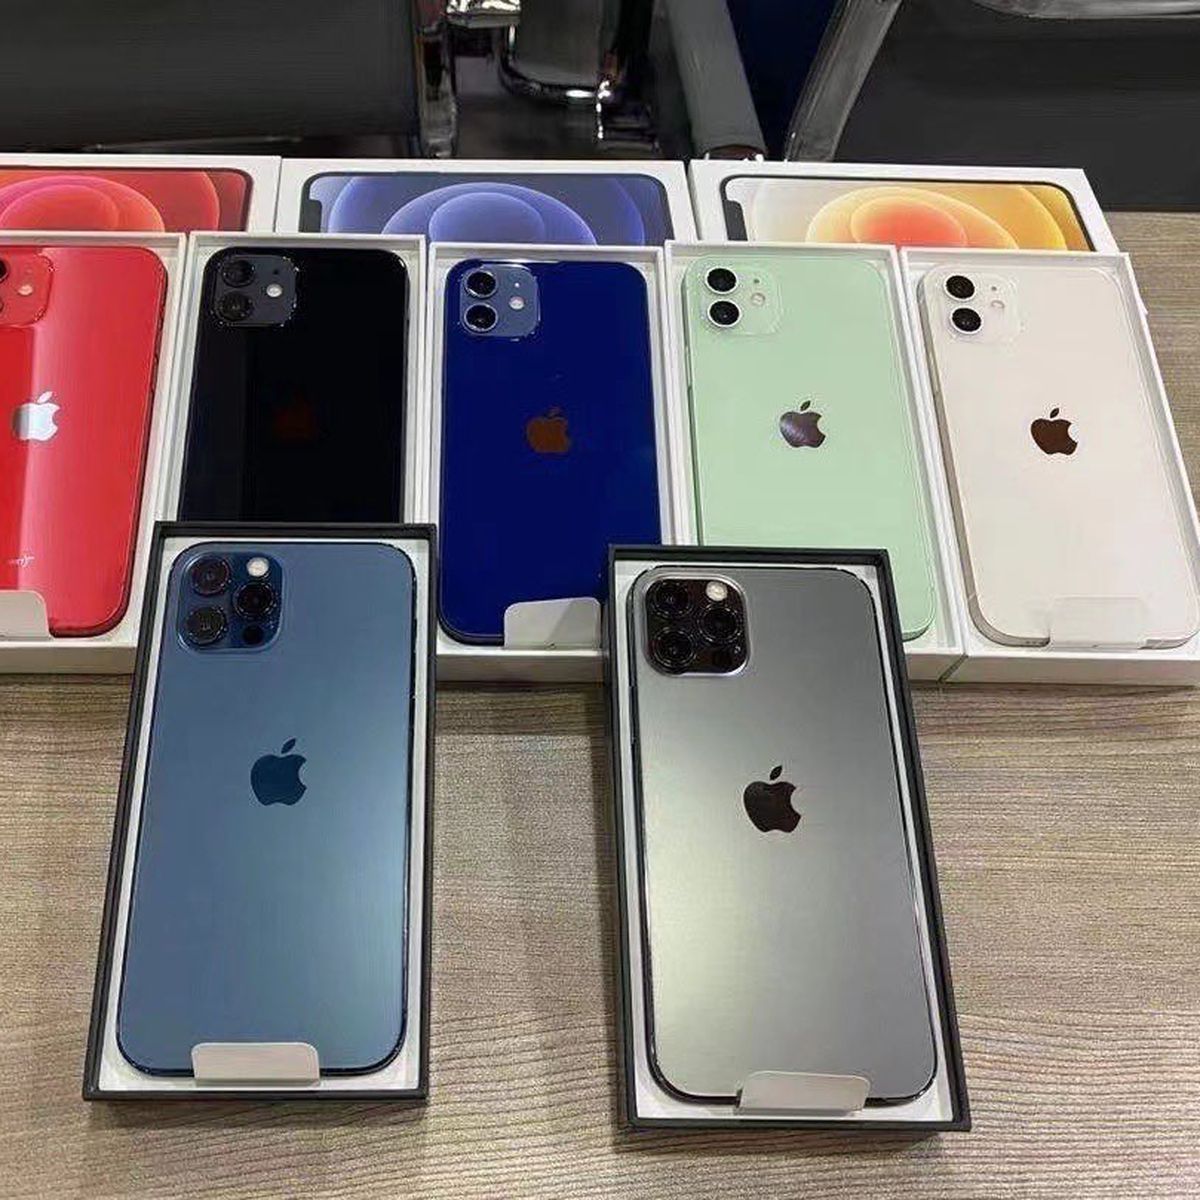 iphone 12 colors 2020